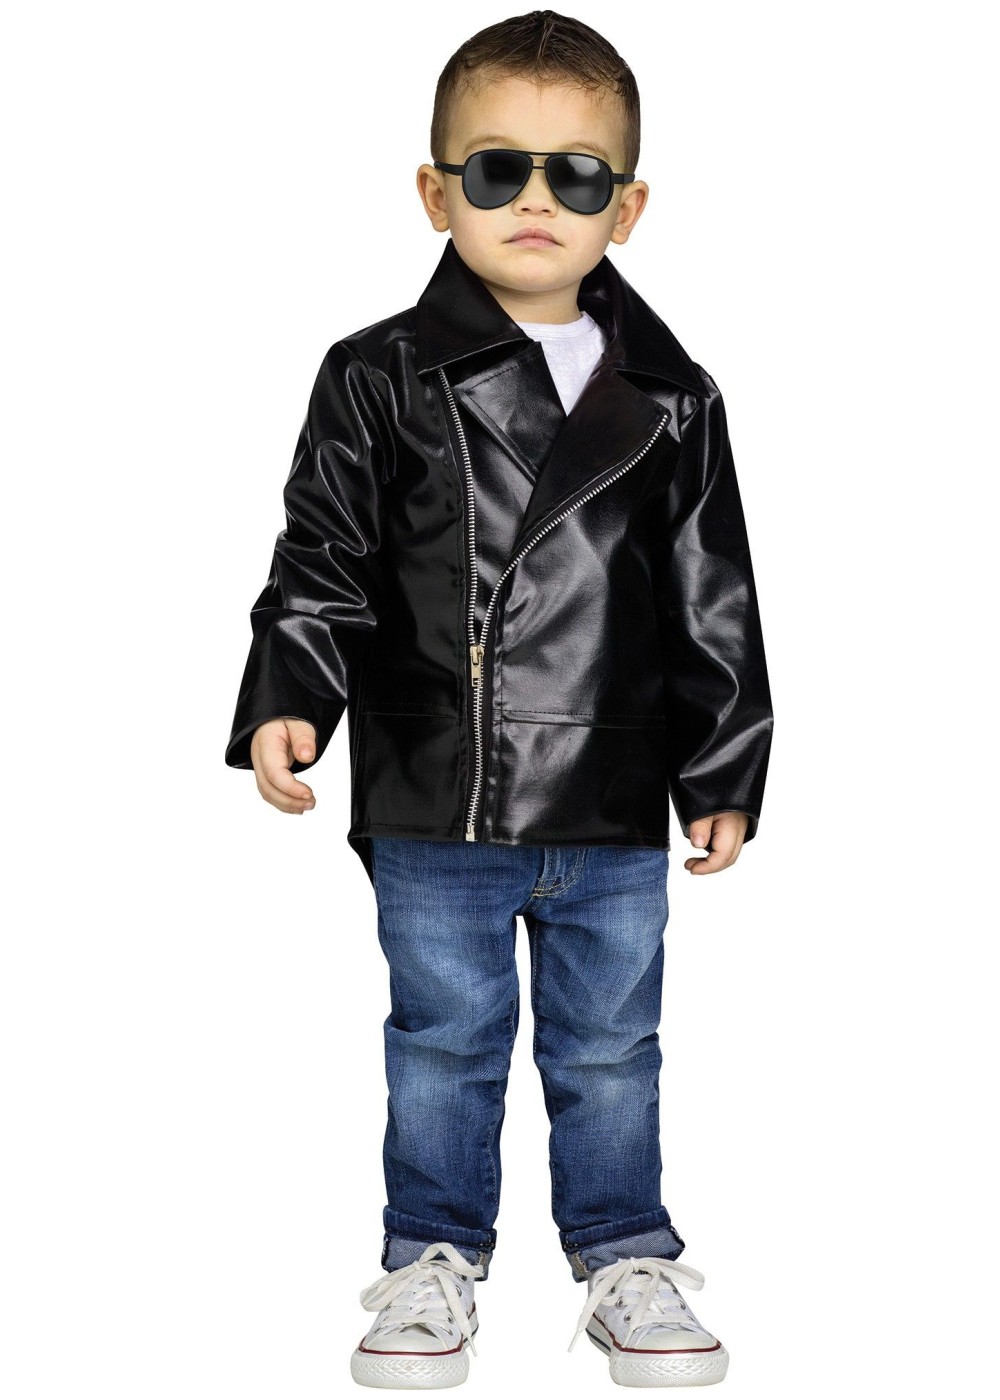 Rock N Roll Toddler Boys Jacket - 1950s Costumes